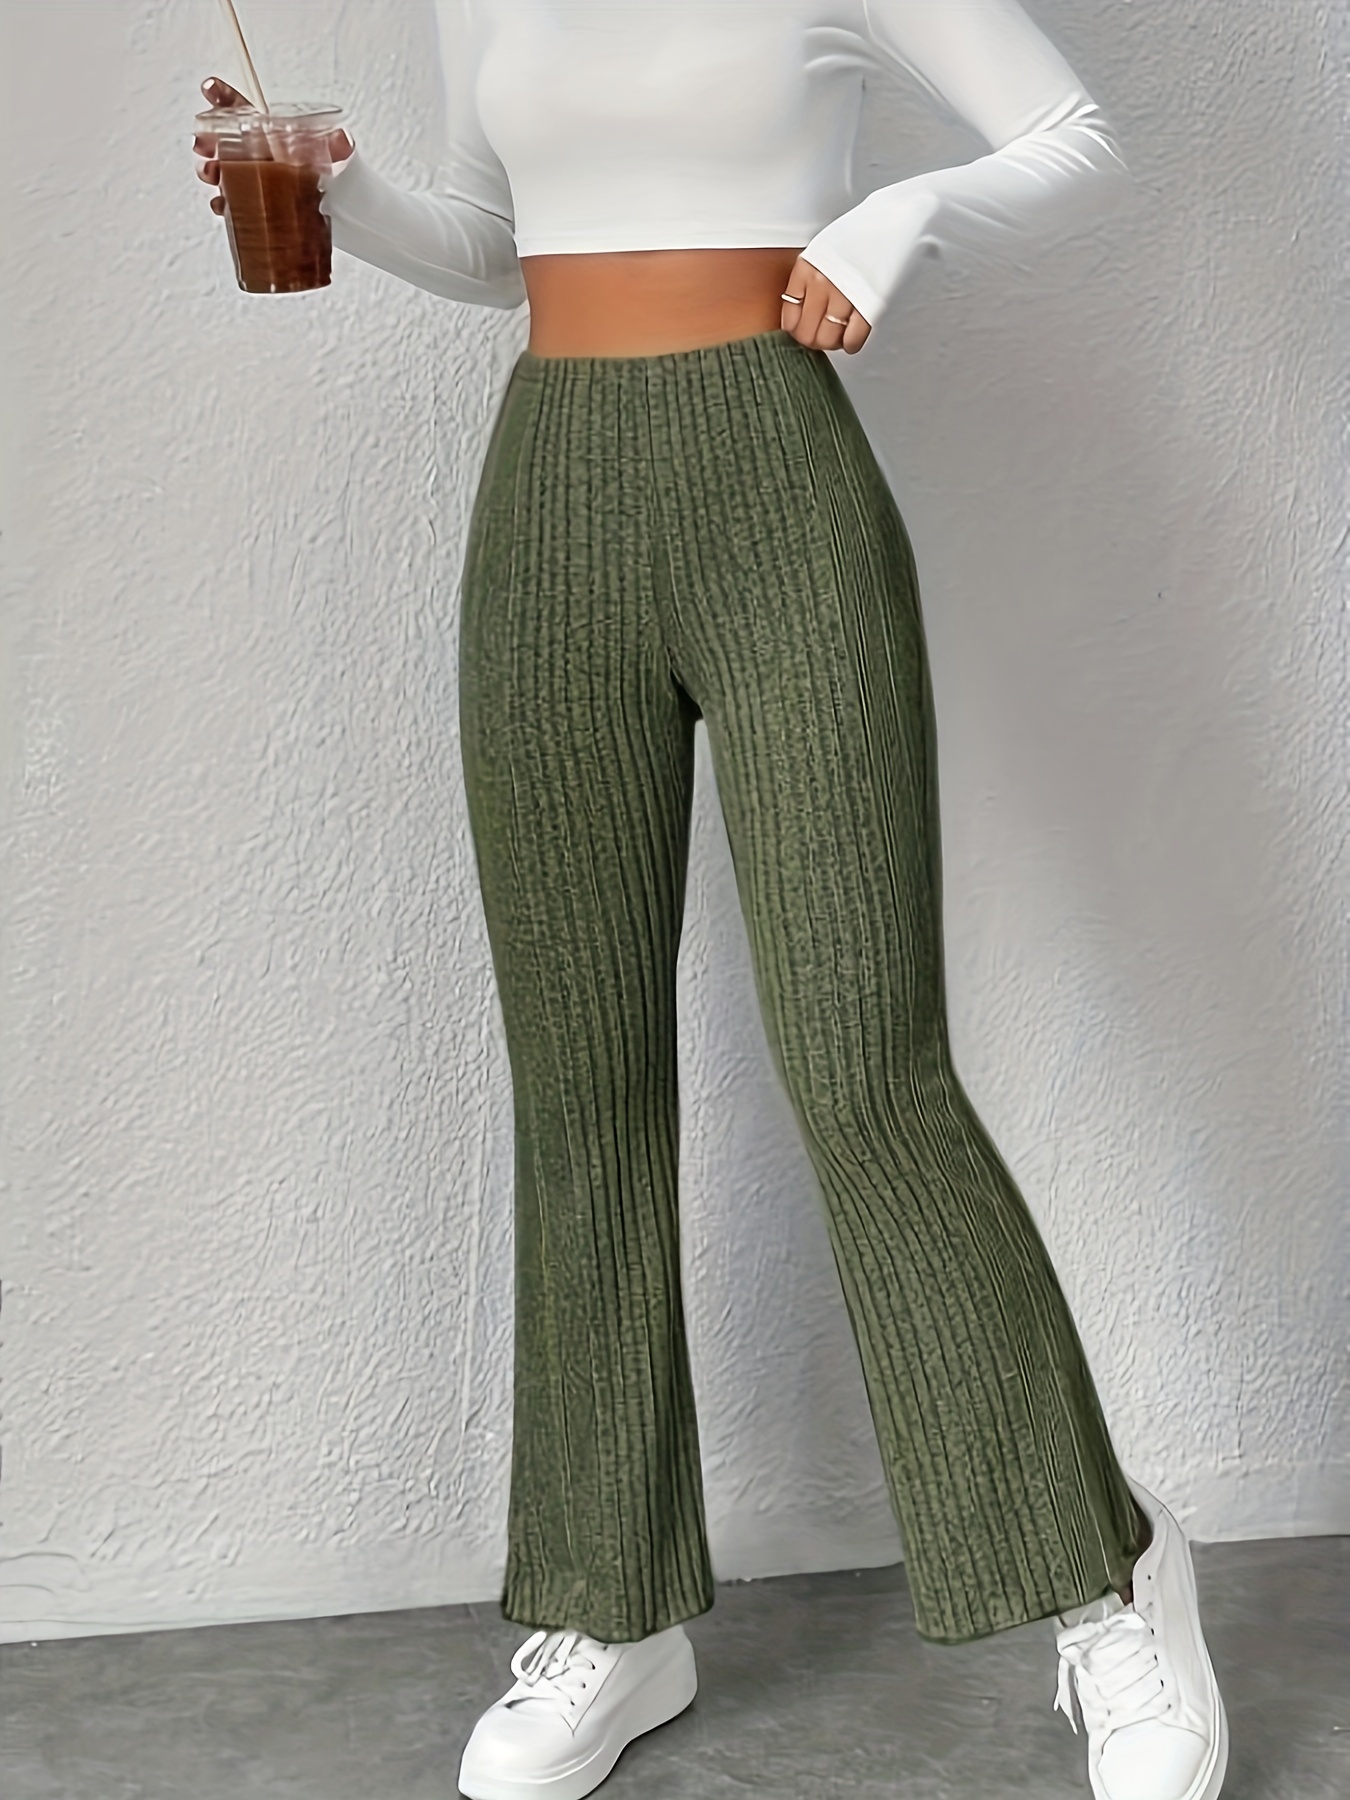 Women's Solid Color High Waist Flare Knit Pants at Rs 1566.82